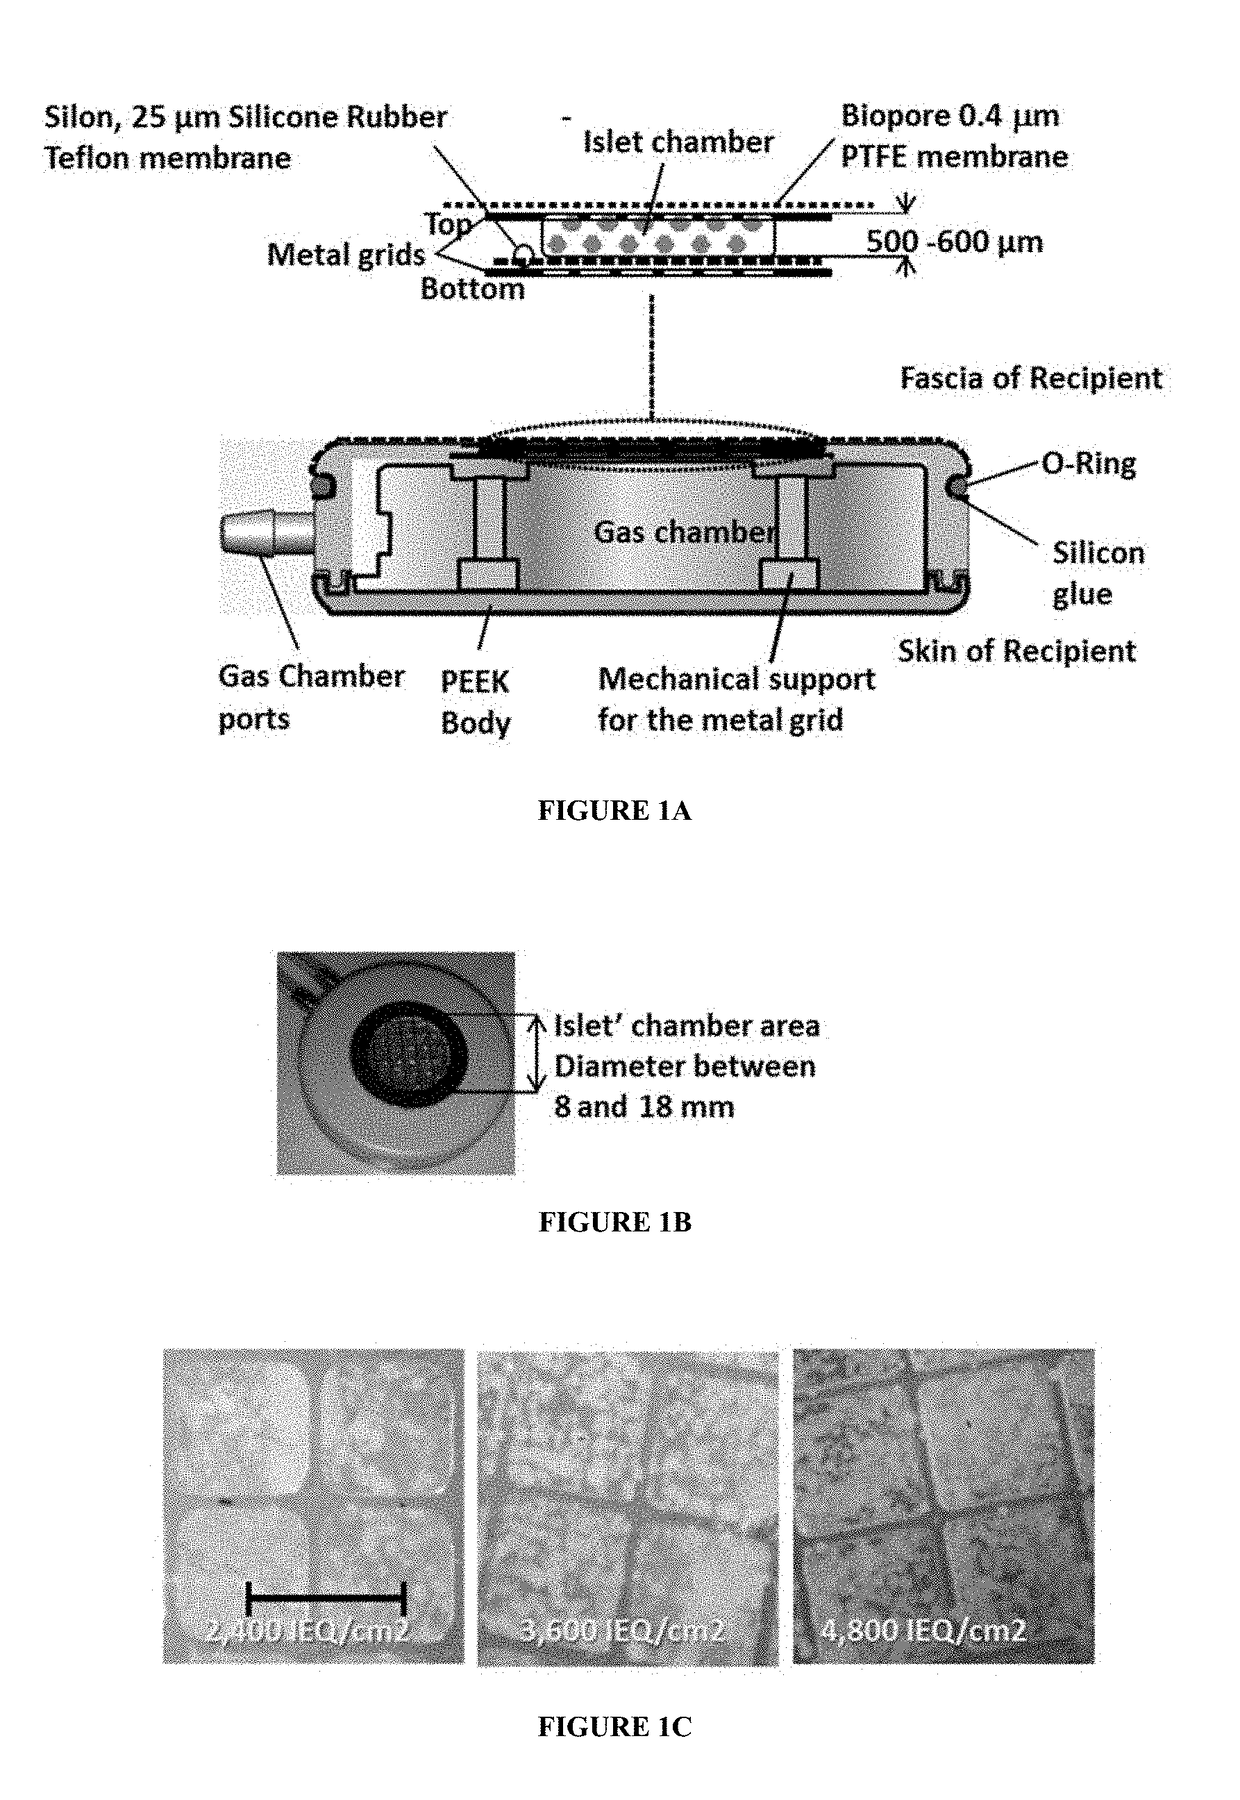 Systems and methods for providing oxygen to transplanted cells